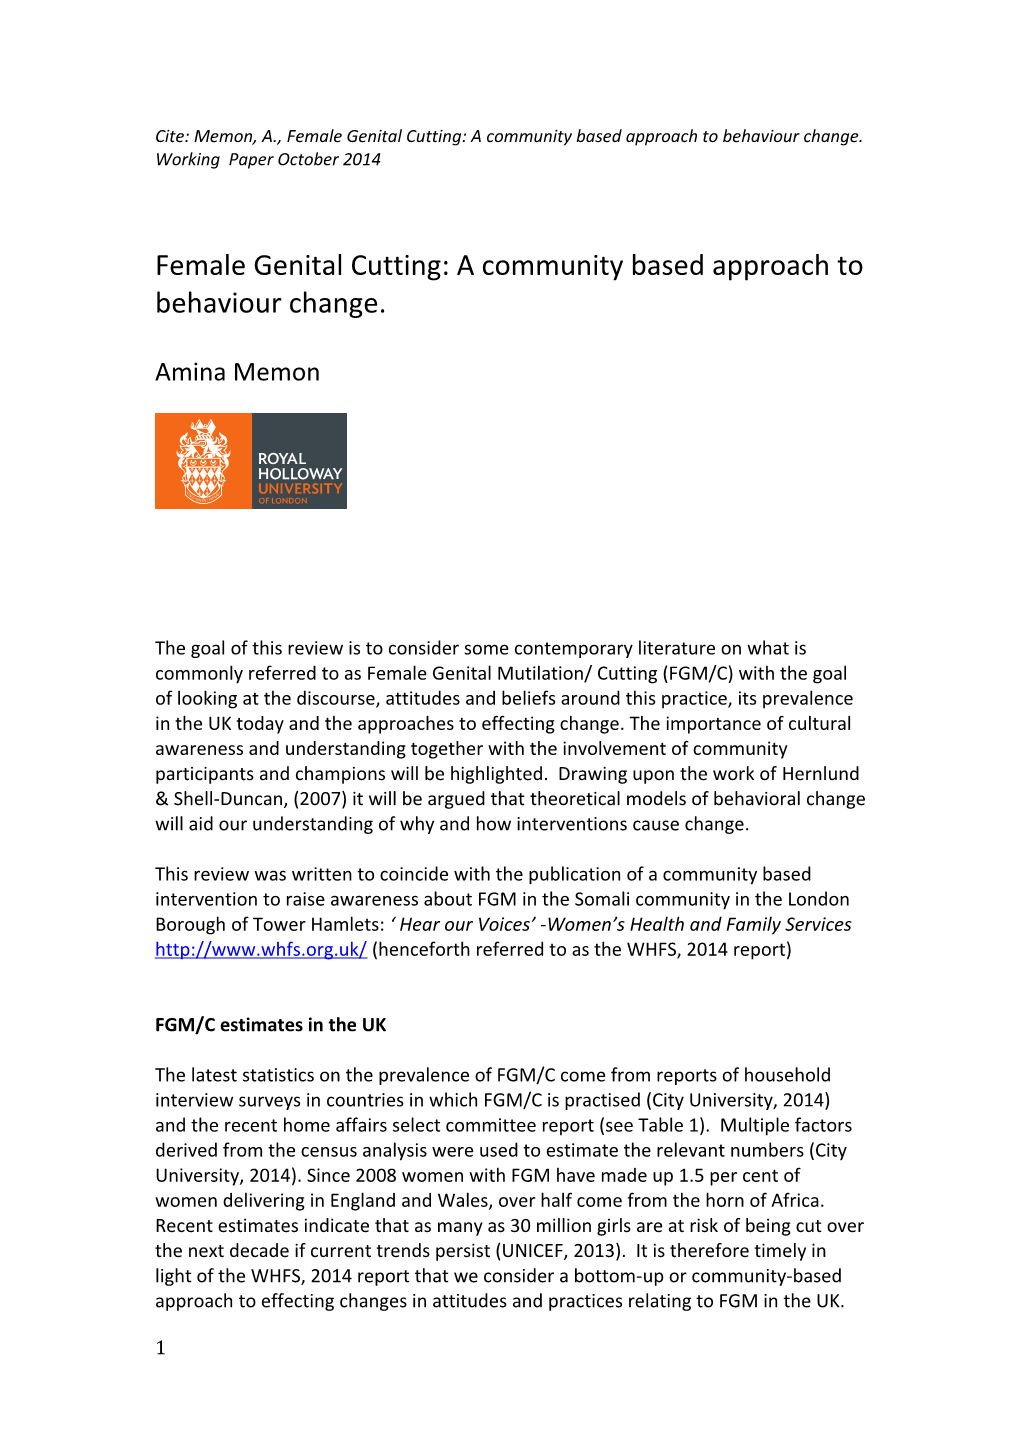 Female Genital Cutting: a Community Based Approach to Behaviourchange